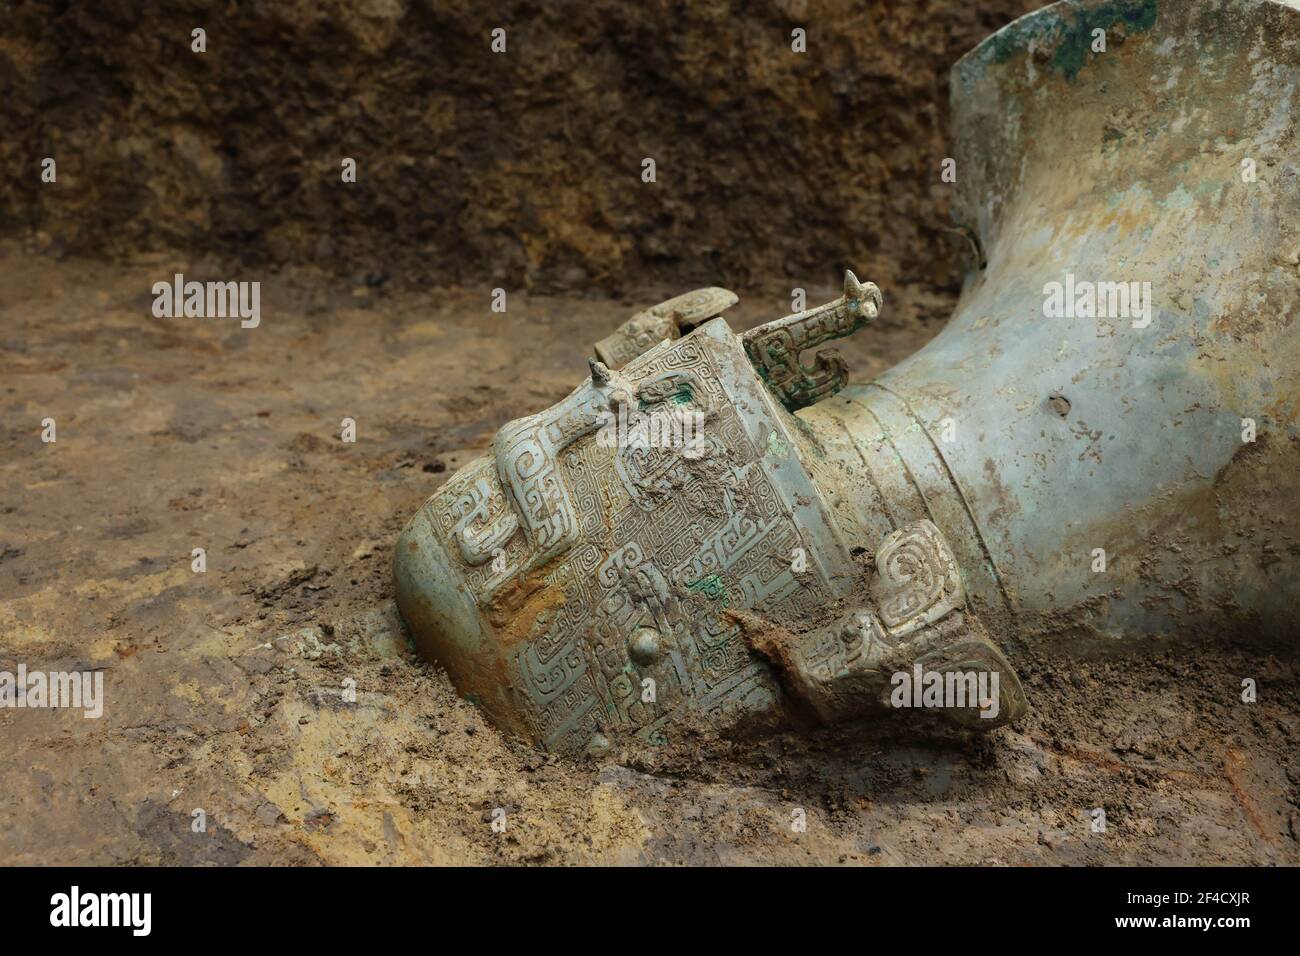 (210320) -- CHENGDU, March 20, 2021 (Xinhua) -- Undated photo provided by the Sanxingdui Ruins sacrificial pits archaeological project shows part of a bronze ware unearthed from the Sanxingdui Ruins site in southwest China's Sichuan Province. Chinese archaeologists announced Saturday that some new major discoveries have been made at the legendary Sanxingdui Ruins site in southwest China, helping shed light on the cultural origins of the Chinese nation. Archaeologists have found six new sacrificial pits and unearthed more than 500 items dating back about 3,000 years at the Sanxingdui Ruins in Stock Photo